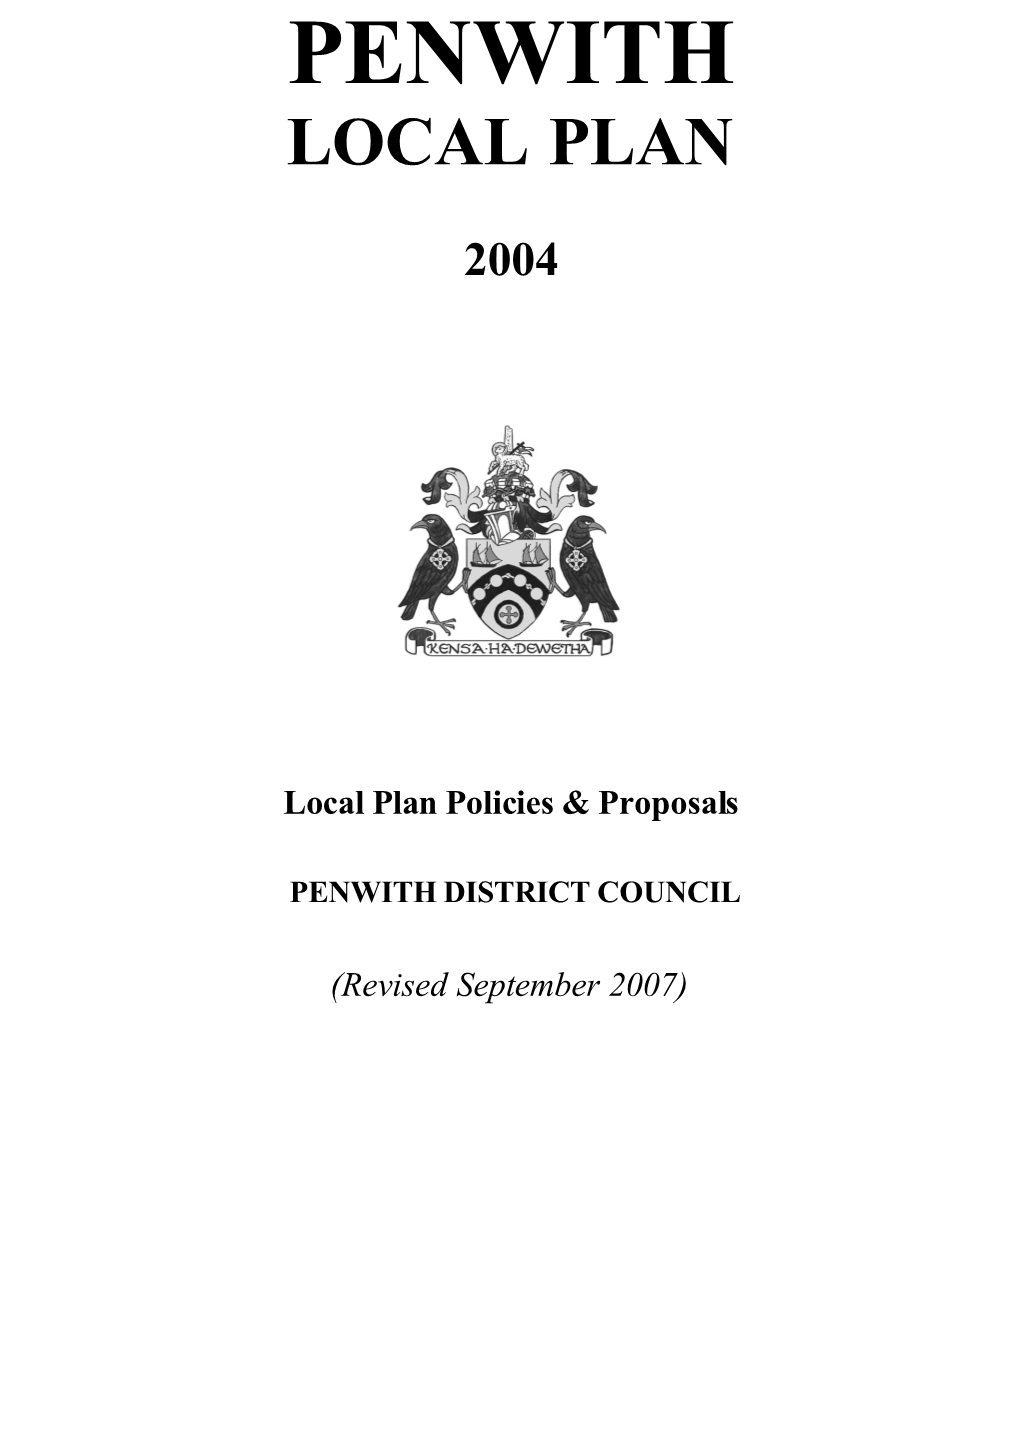 Penwith Local Plan Policies & Proposals